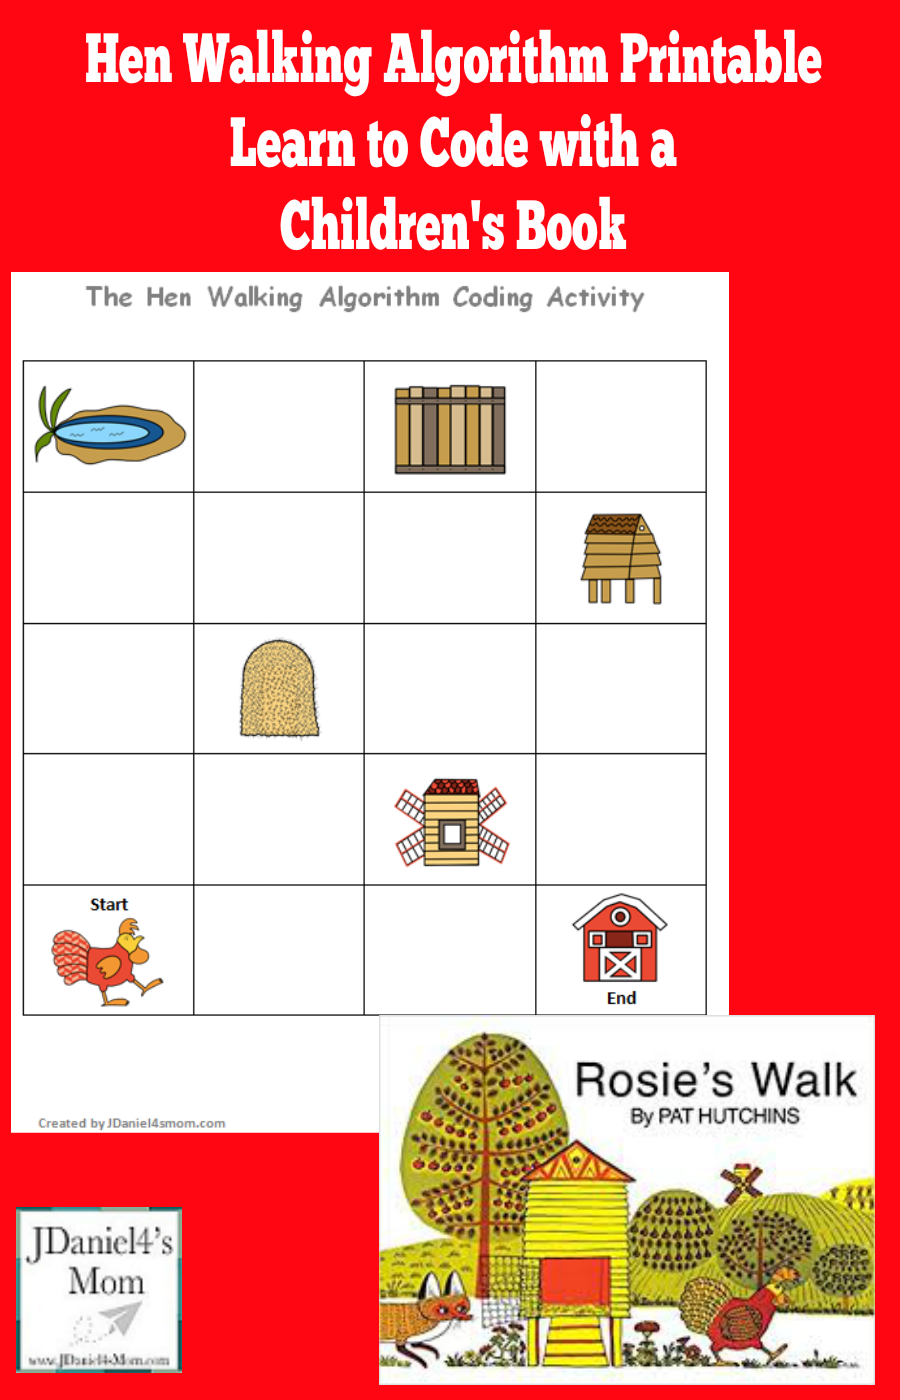 Learn to Code with a Children's Book - Hen Walking Algorithm Based on Rosie's Walk : Your children will work on connecting the landmarks in the book to create a story map or algorithm.